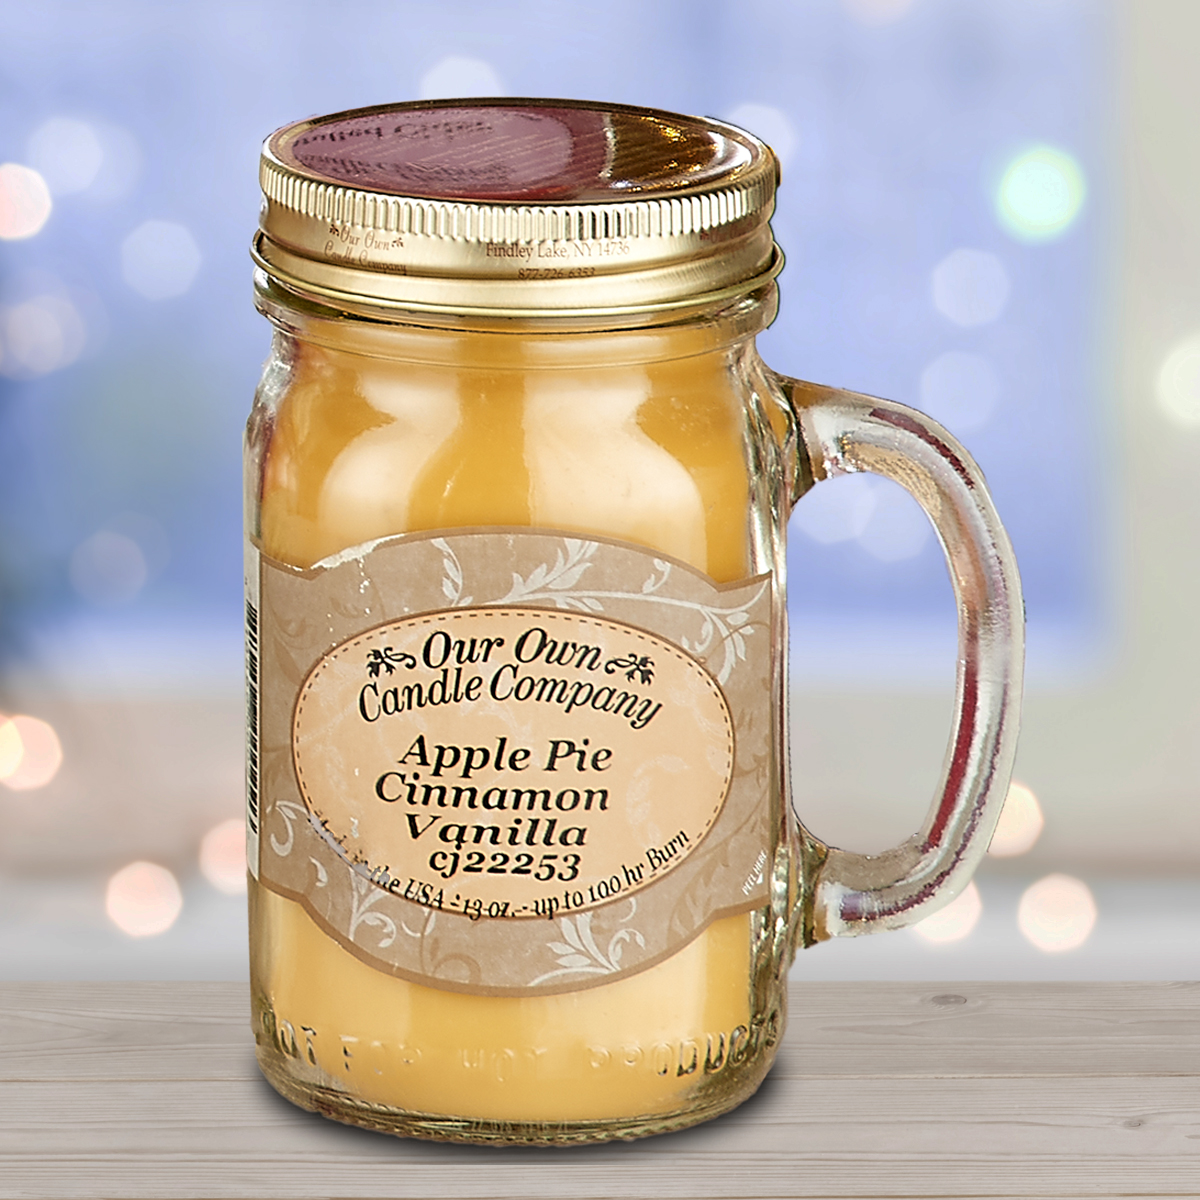 Our Own Candle Company Apple Pie Triple 13oz. Mason Jar Candle